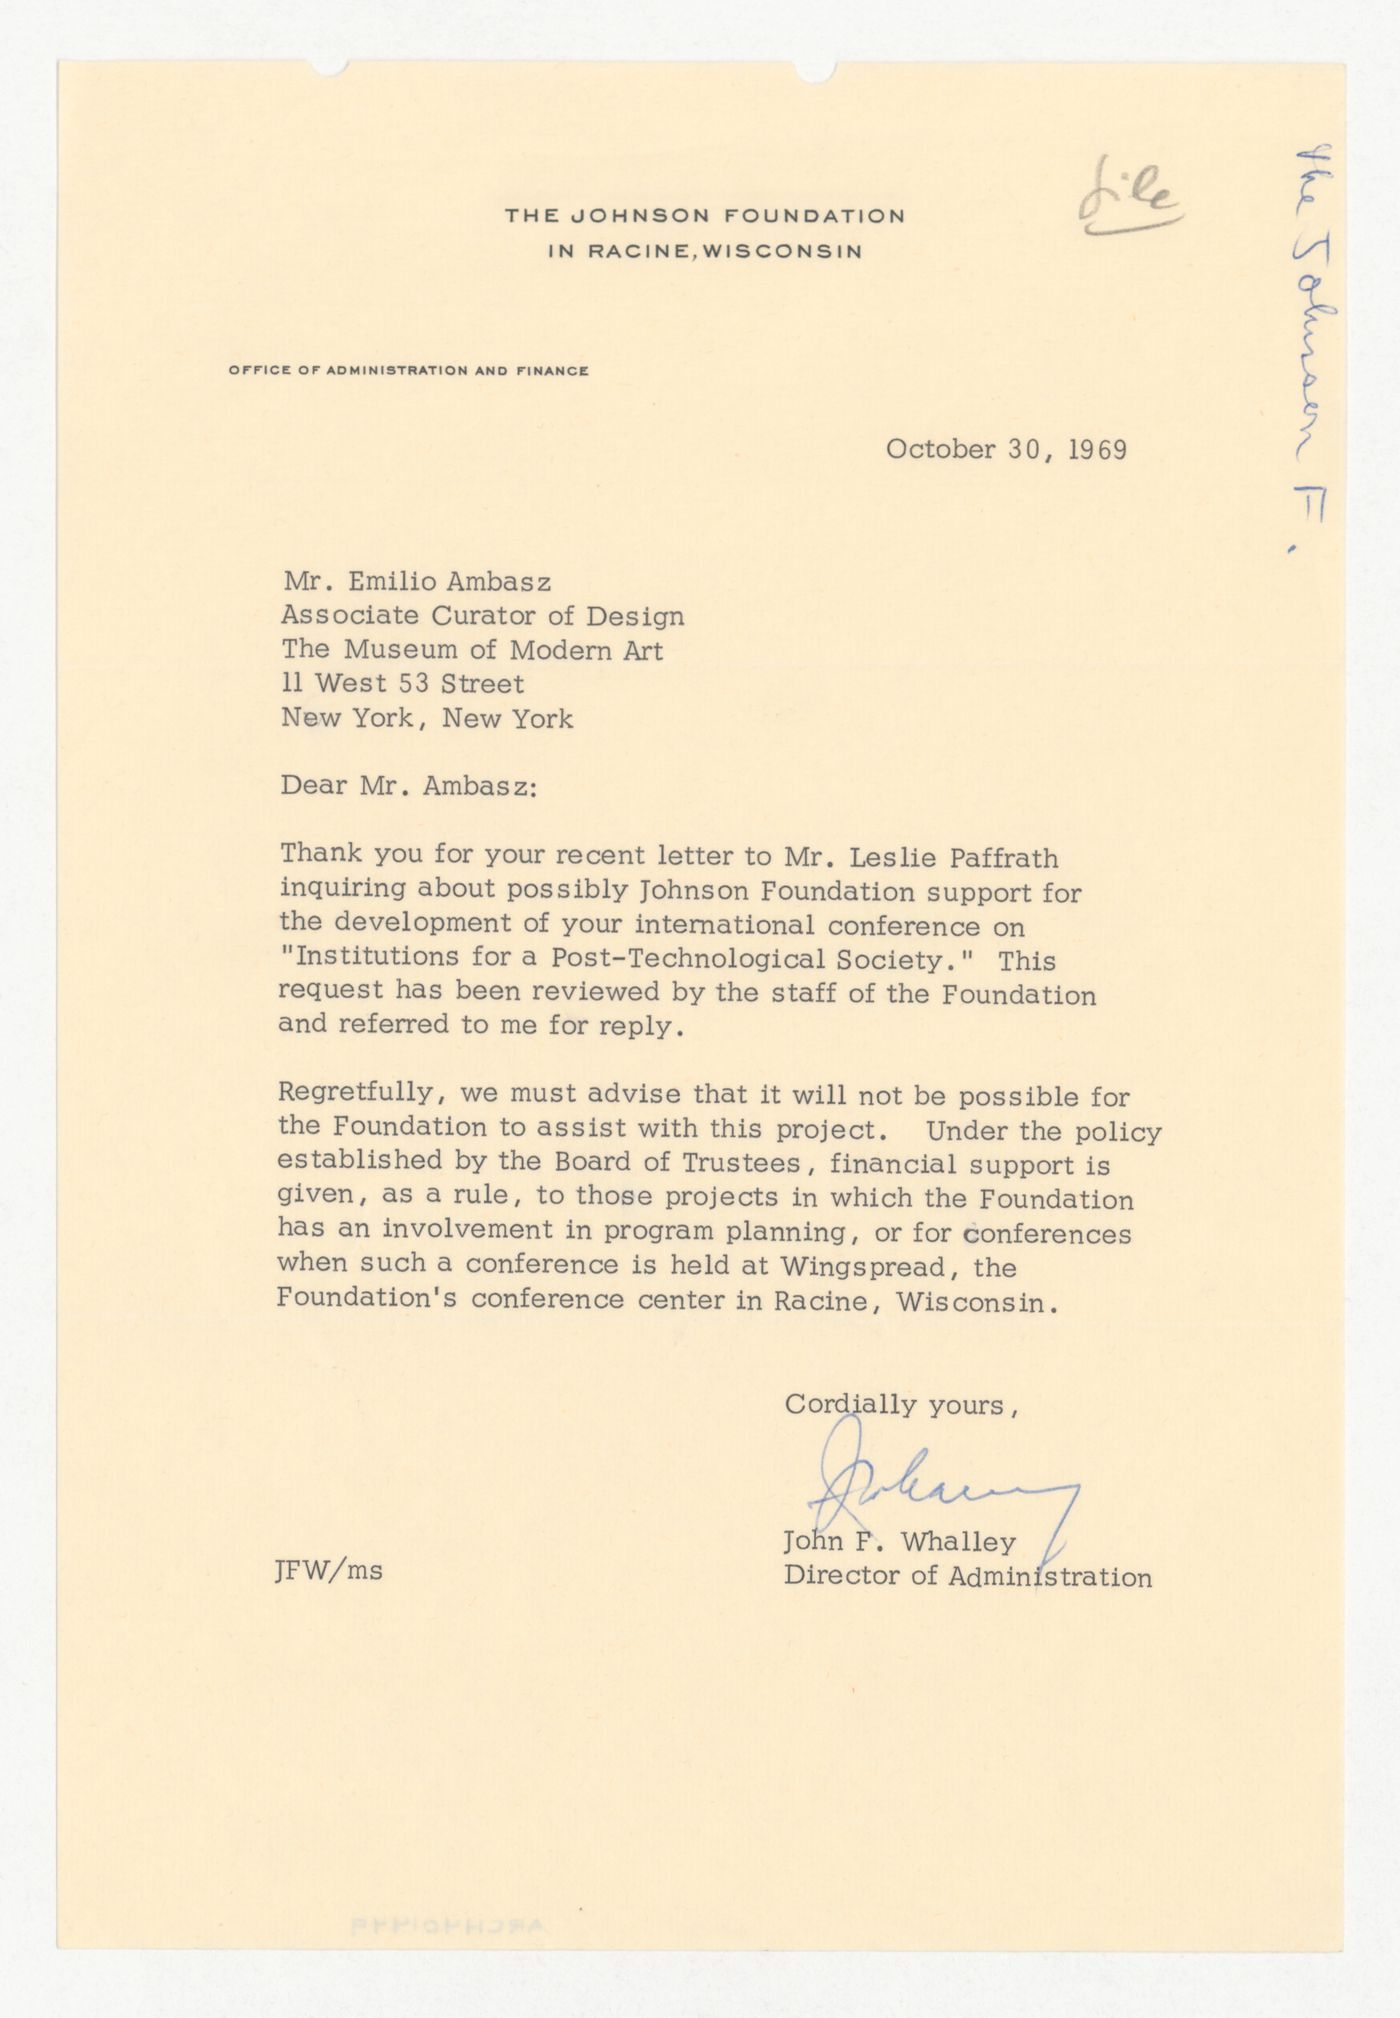 Letter from John F. Whalley to Emilio Ambasz responding to proposal for Institutions for a Post-Technological Society conference